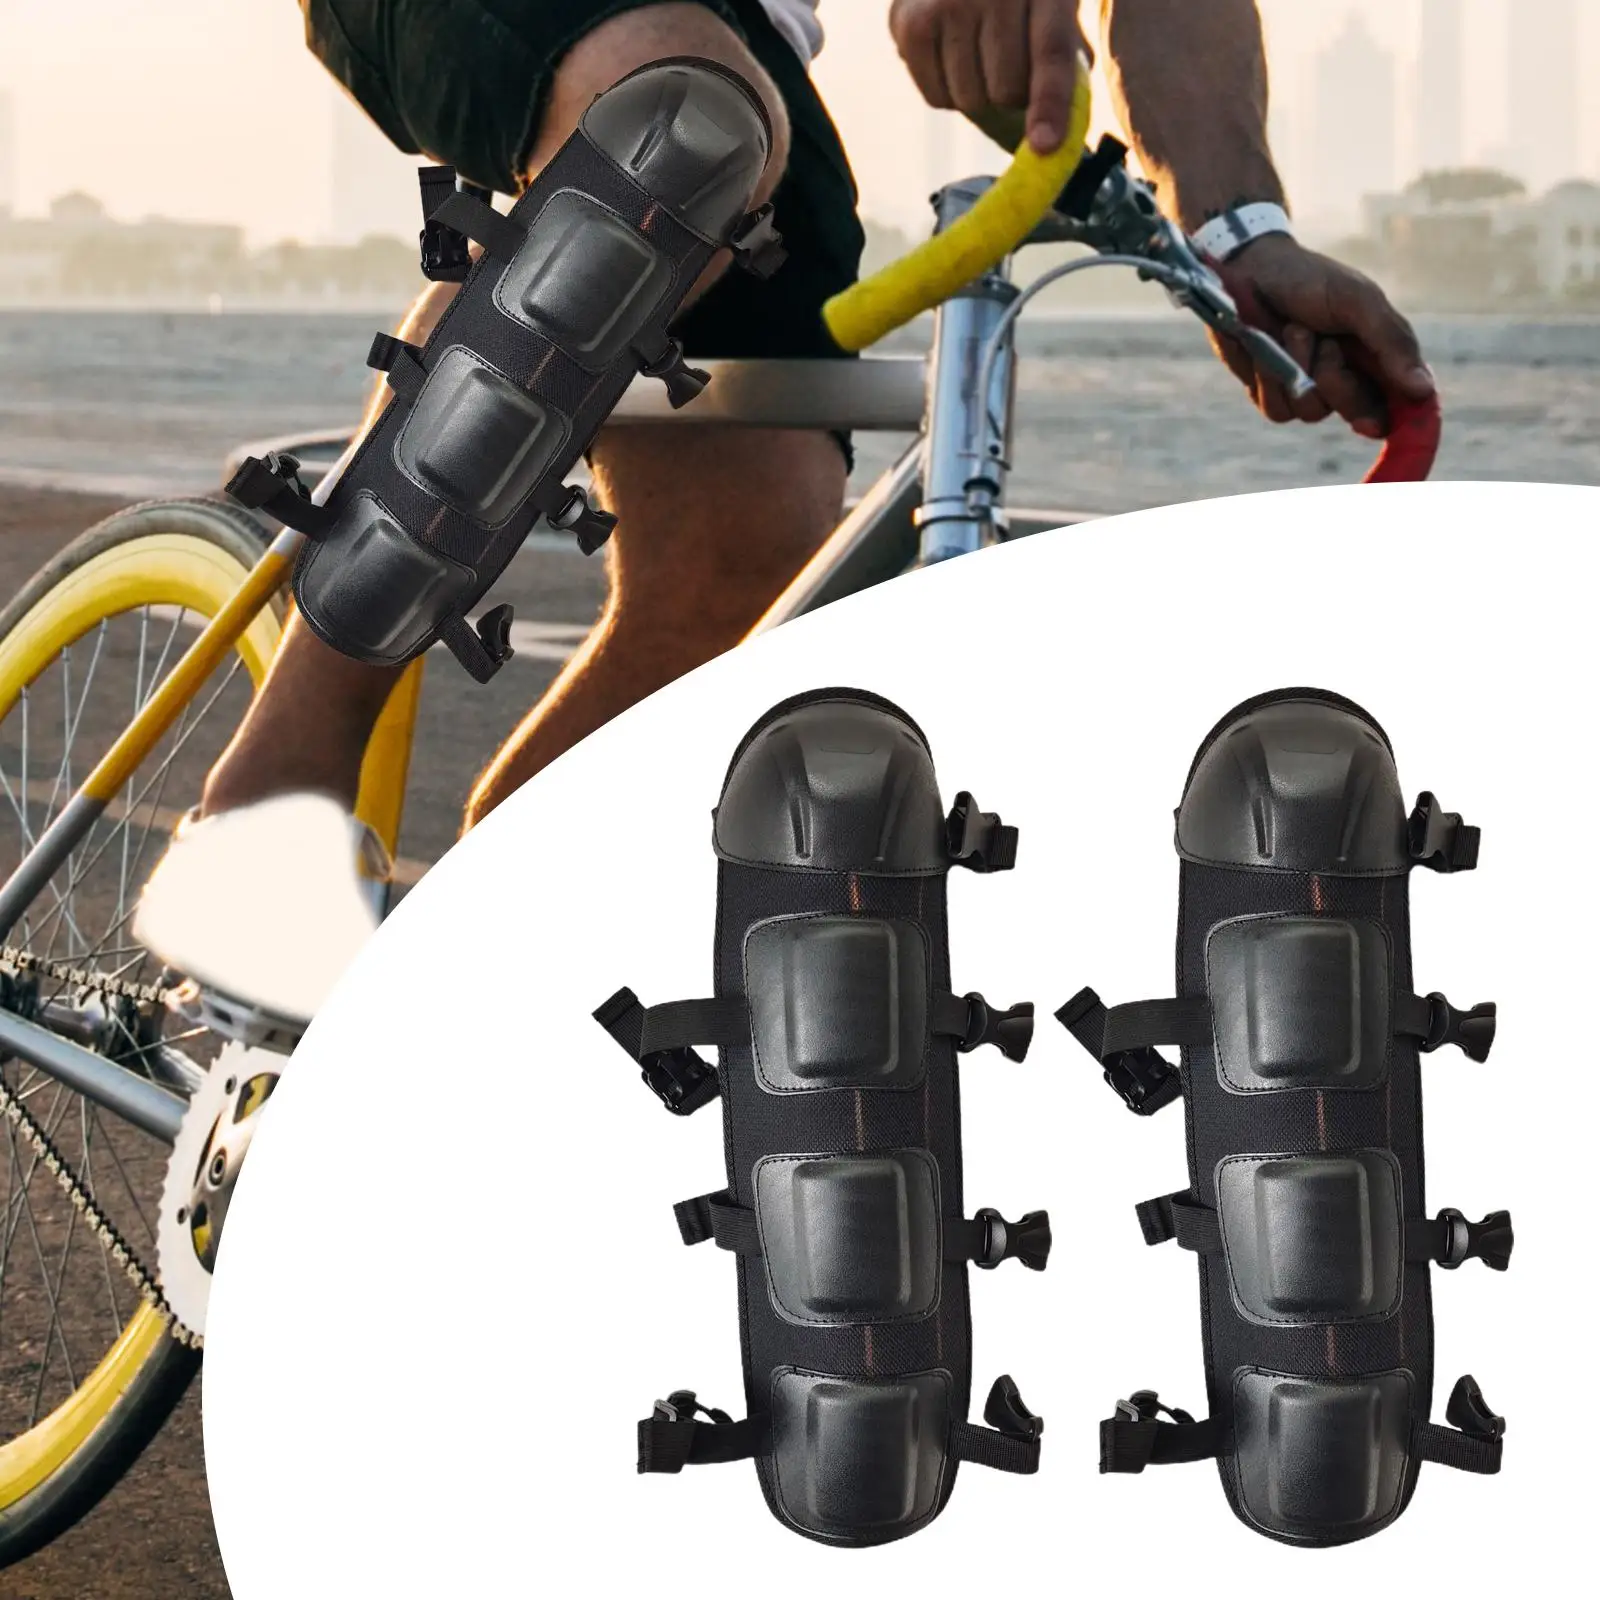 Work Knee Pads Kneelet Protective Gear Soft Leg Protector Chain Saw Shin Guards for Mountain Bikes Gardening Riding